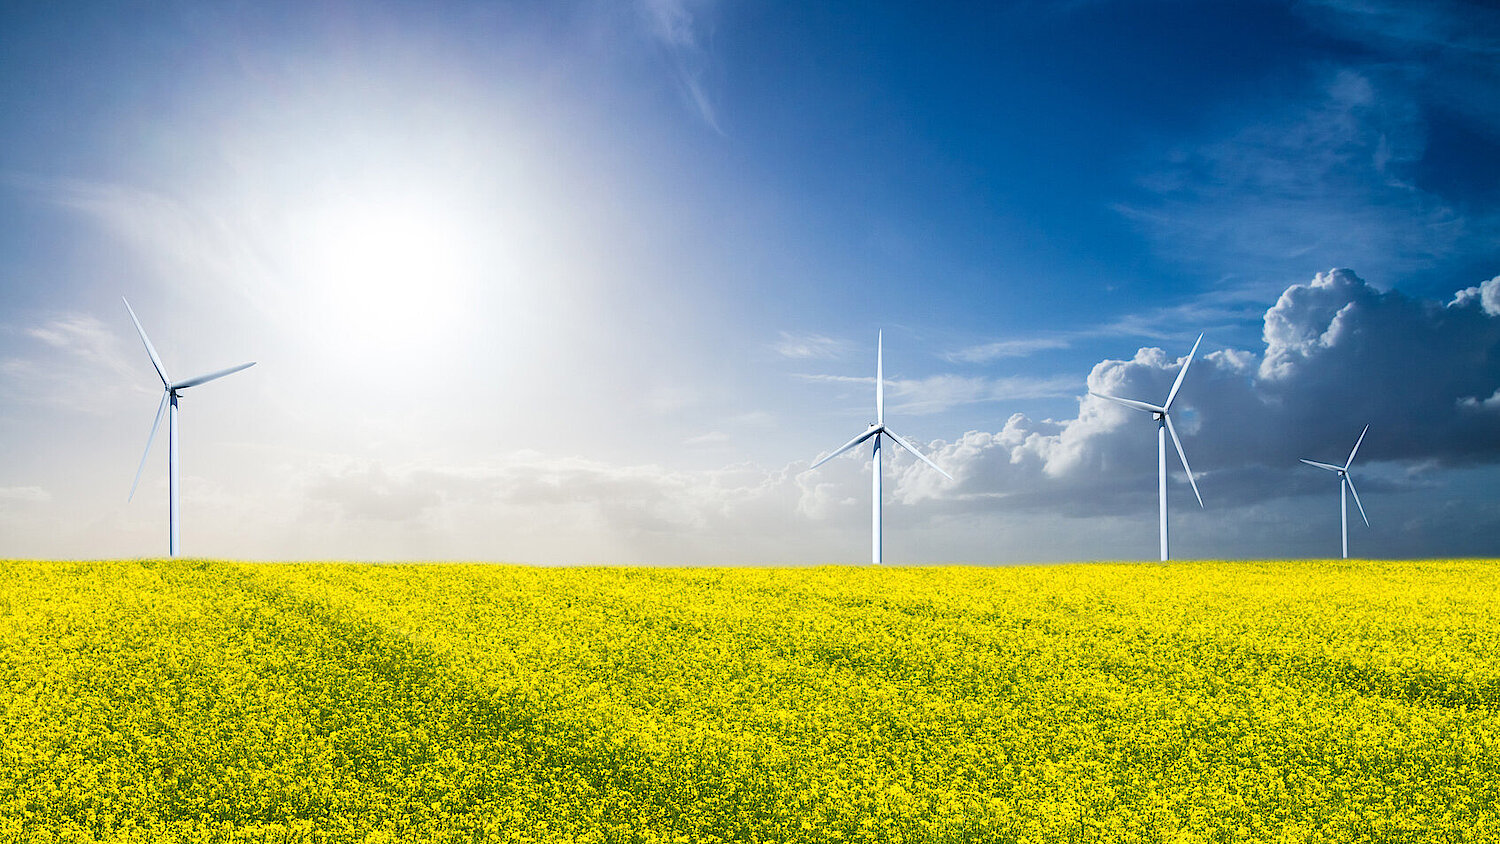 Photo of an agricultural landscape with wind turbines